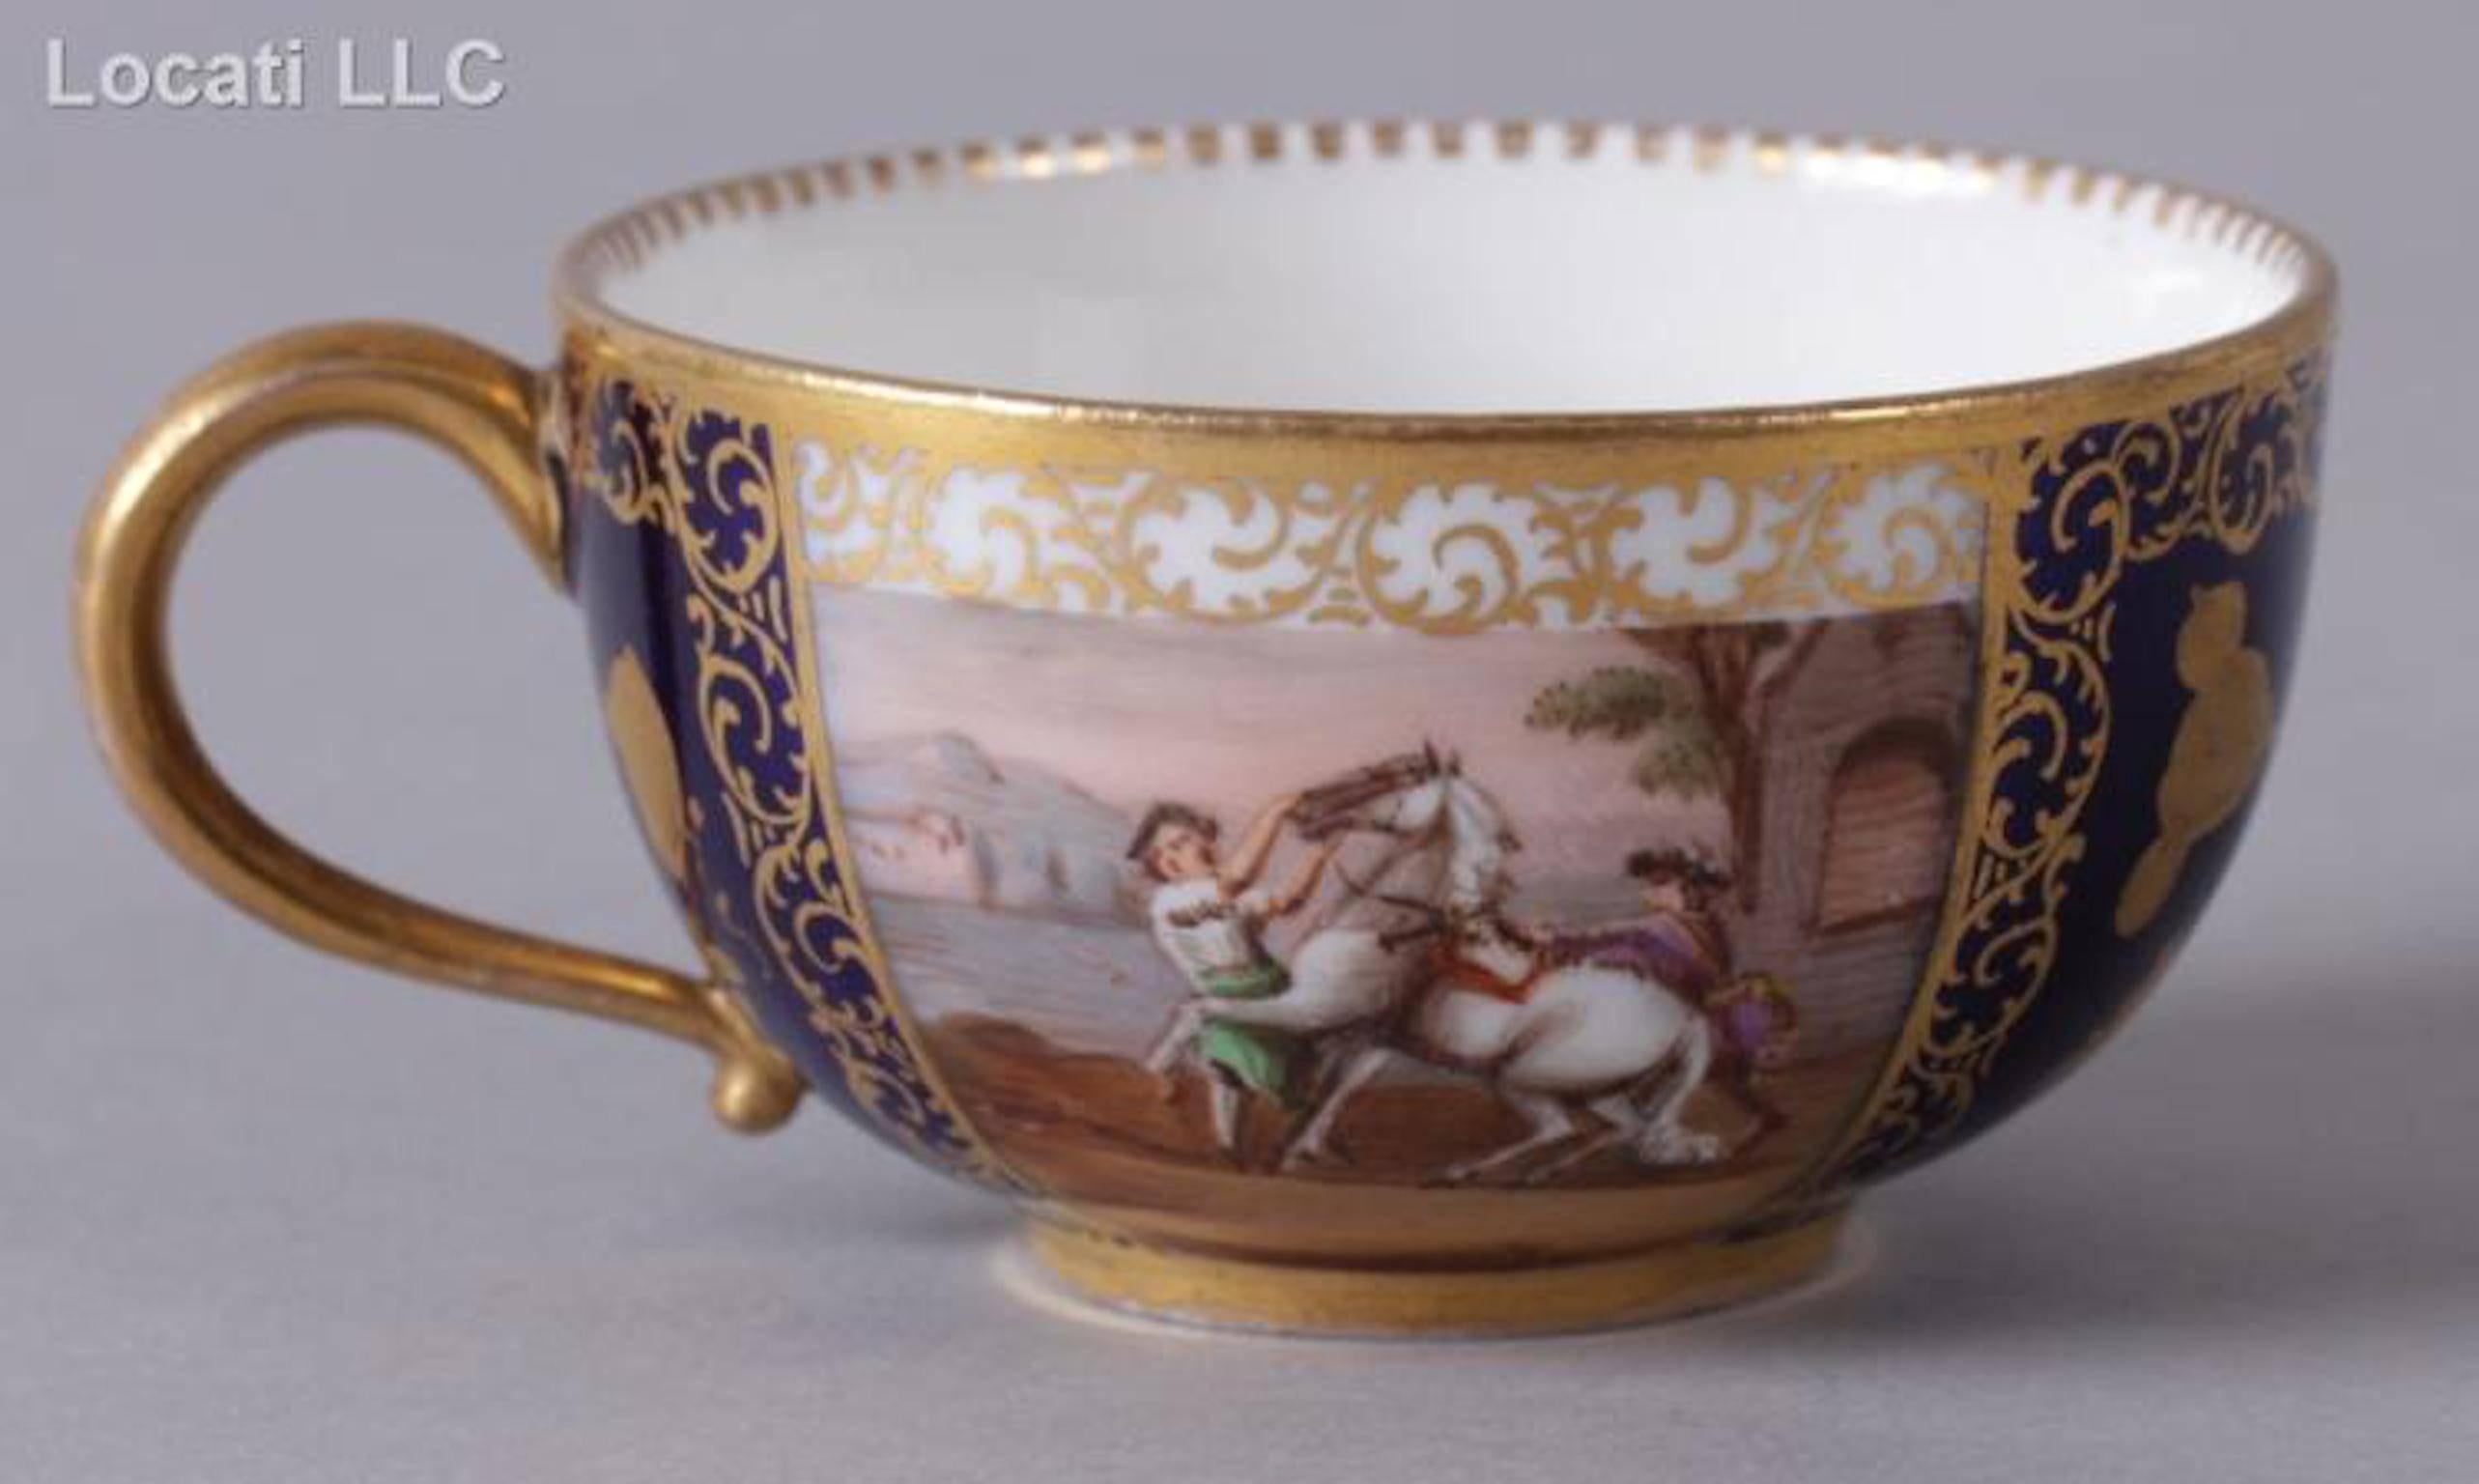 Each piece with hand-painted alternating panels of gilt floral decoration on a cobalt ground and hand-painted scenes of figures and horses.
The saucers are 5 5/8in diameter, the cups are 4in W x 3 1/4in D x 1 3/4in H.